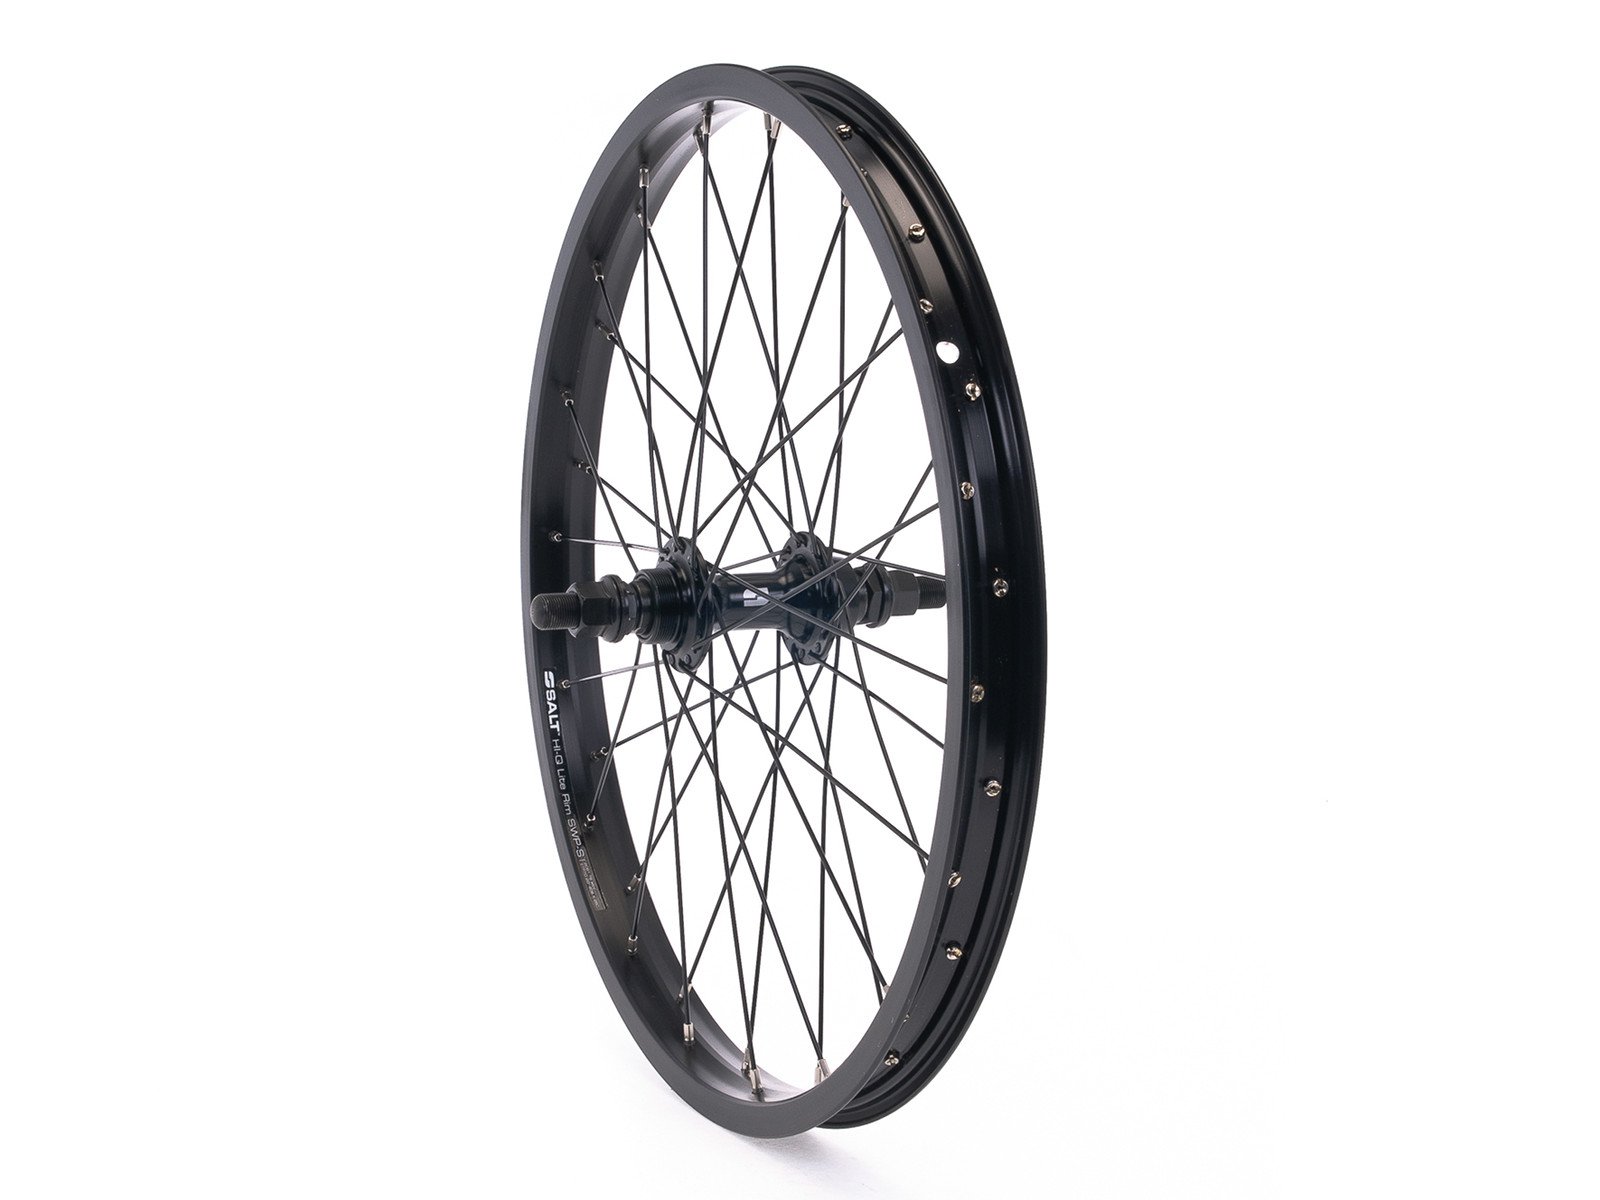 16 inch bicycle wheels and tires